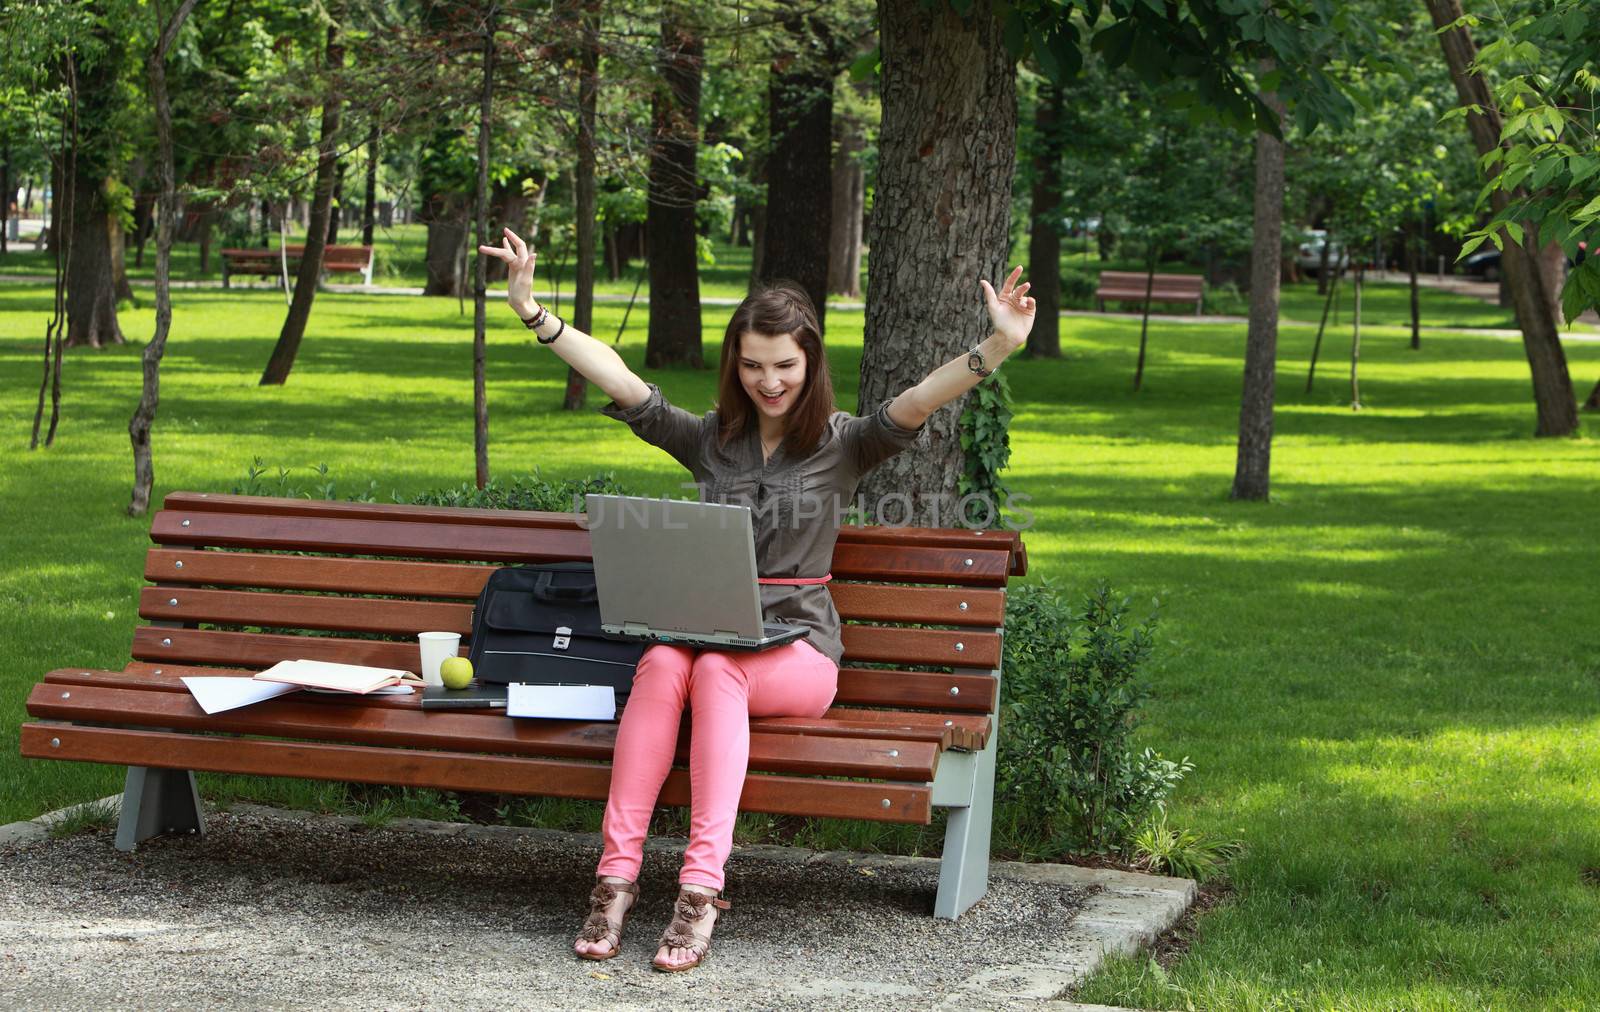 Happy young woman with a laptop rising her arms up, outside in an urban park.